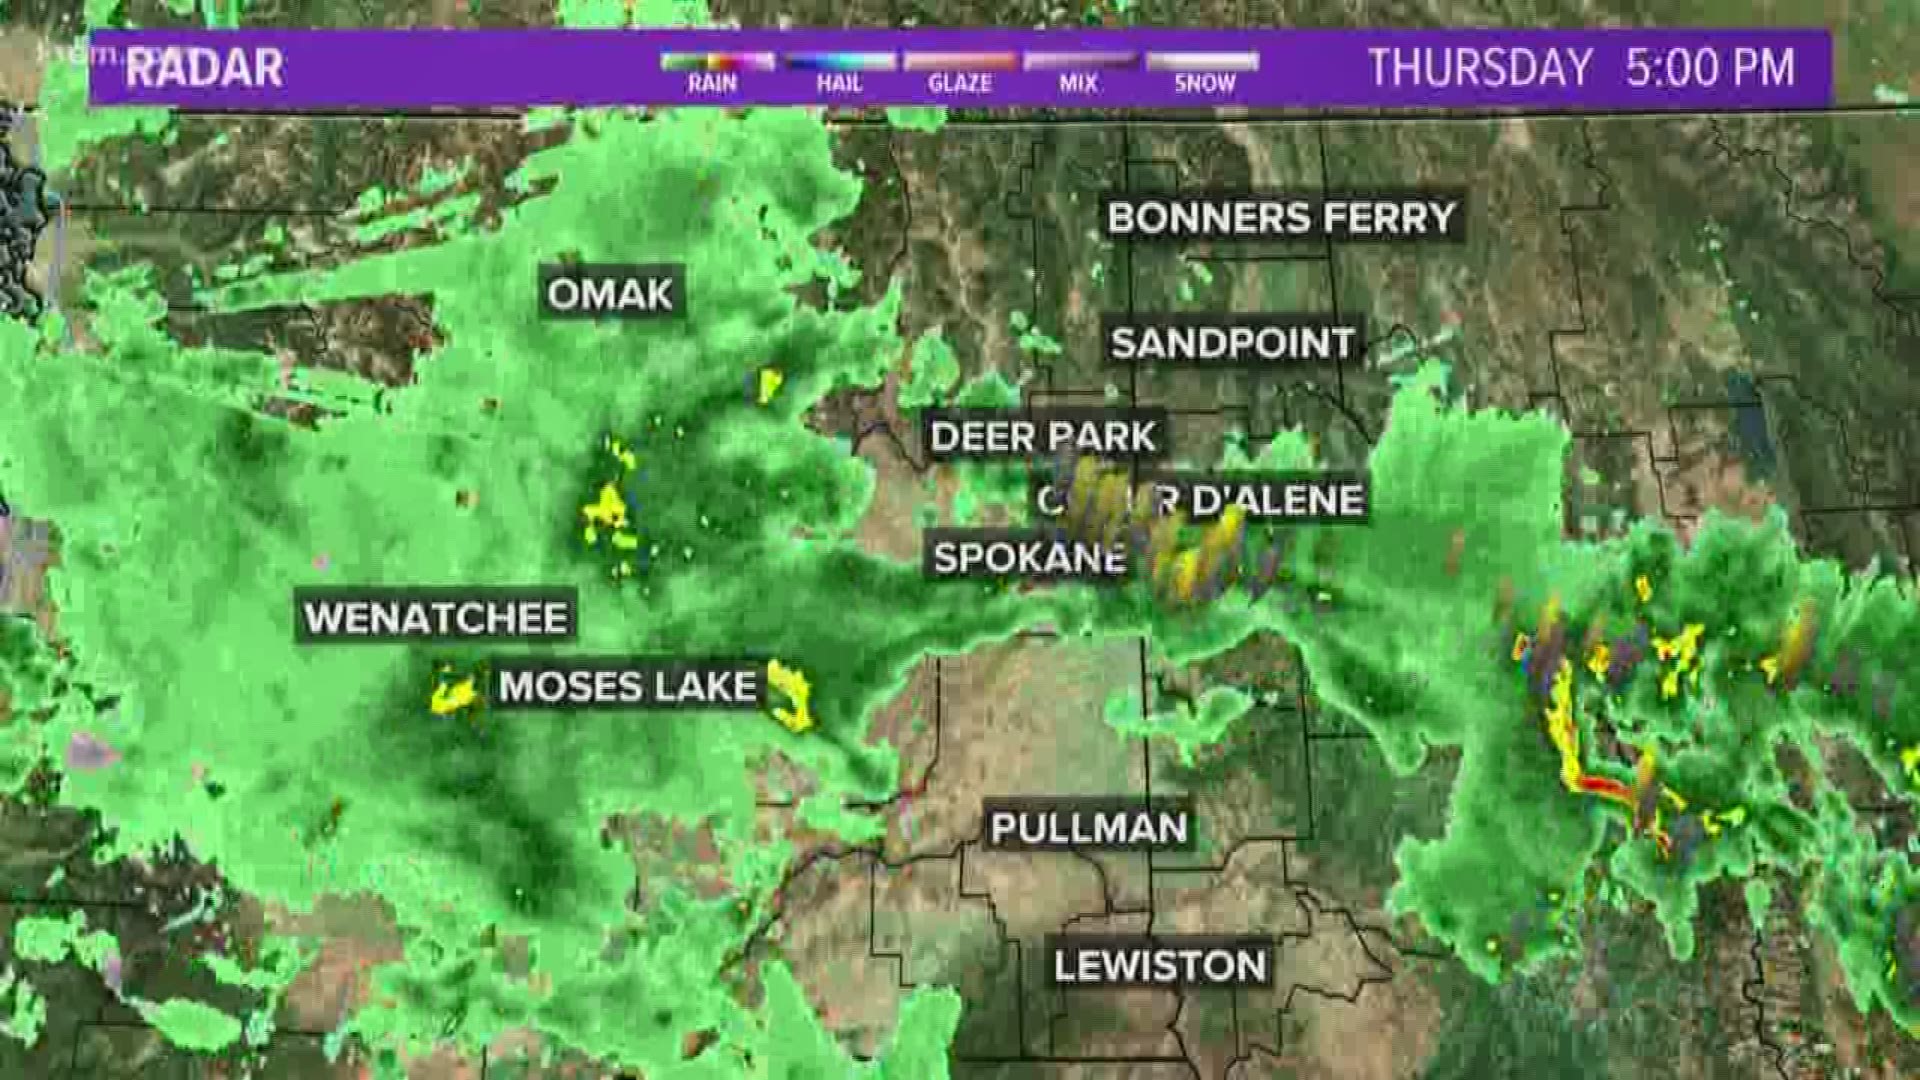 KREM Chief Meteorologist Tom Sherry provides an update on severe rain and thunderstorms in Eastern Washington and North Idaho on May 16, 2019.